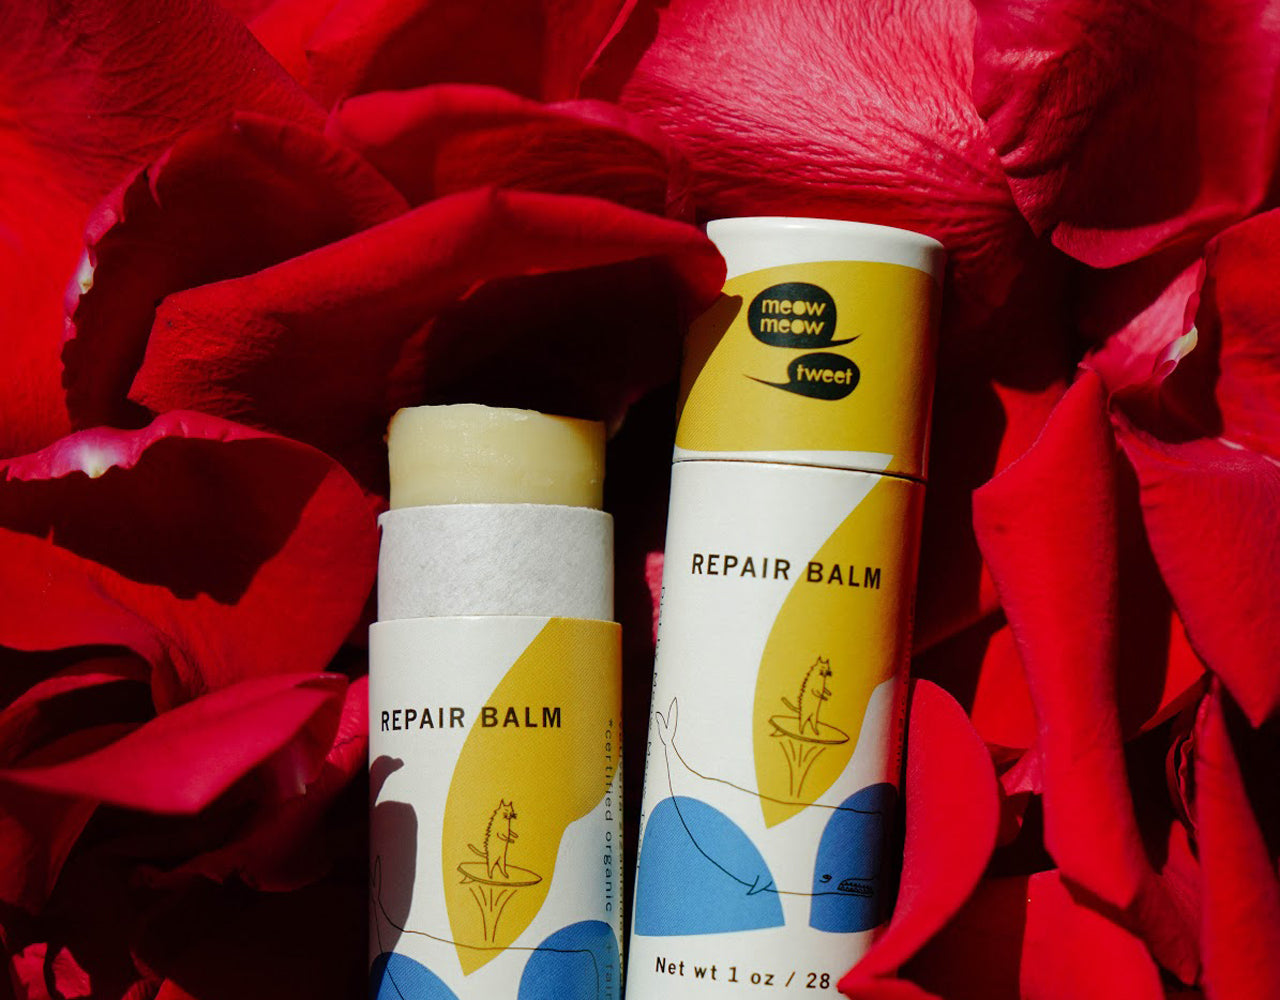 Open stick of repair balm against a background of red rose petals